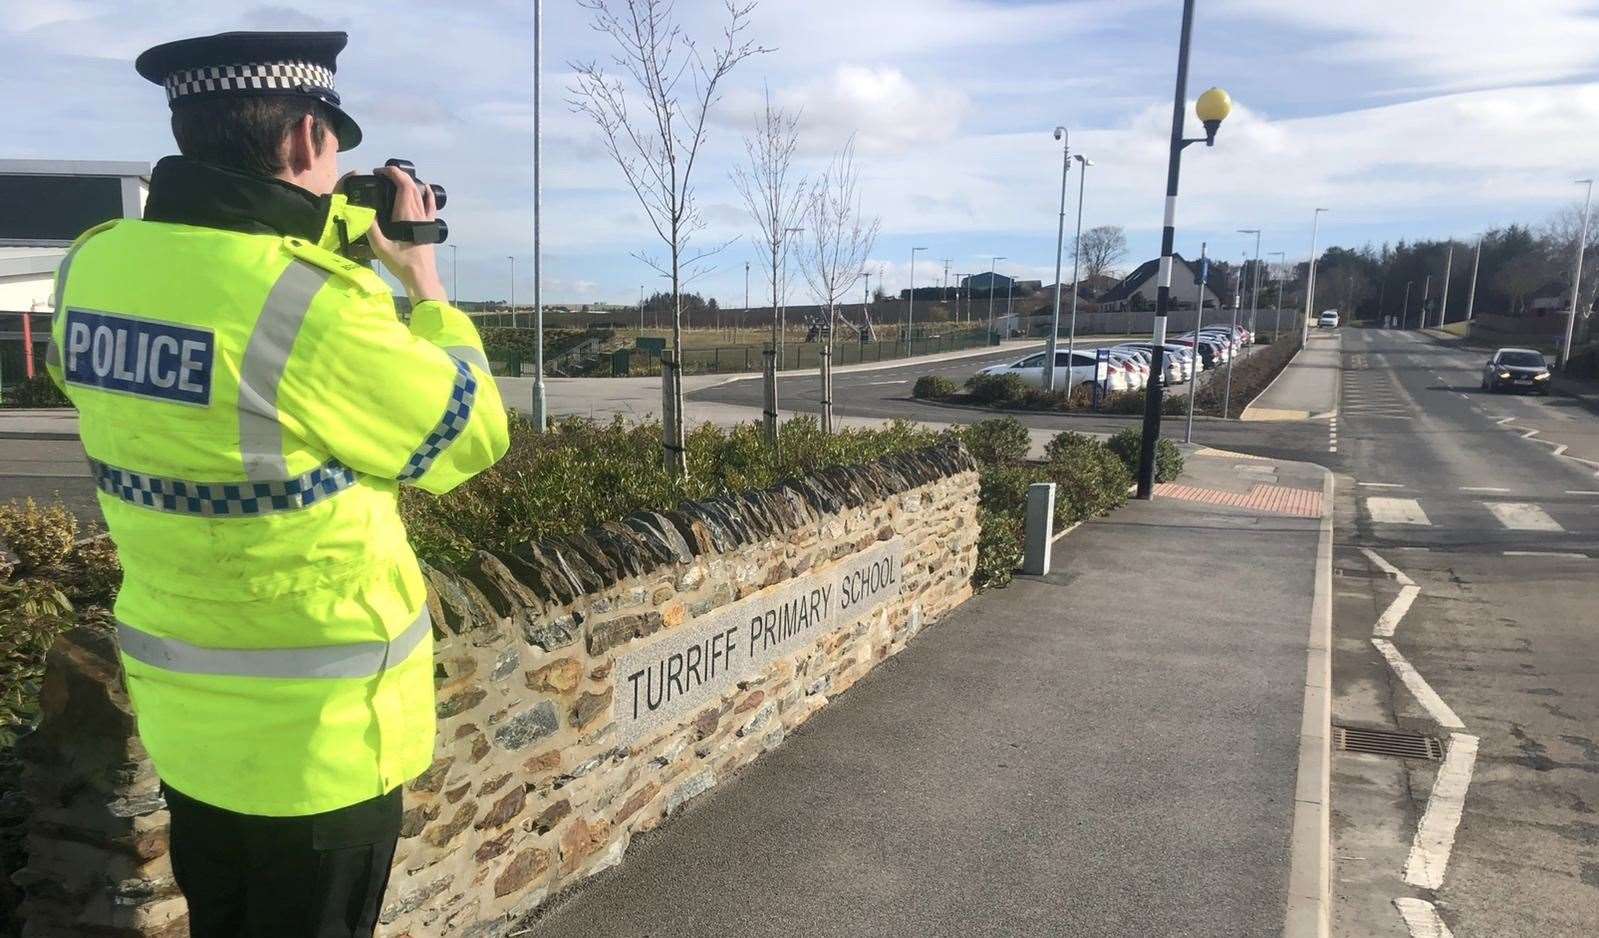 Speeding near Turriff School was addressed by officers on Monday.